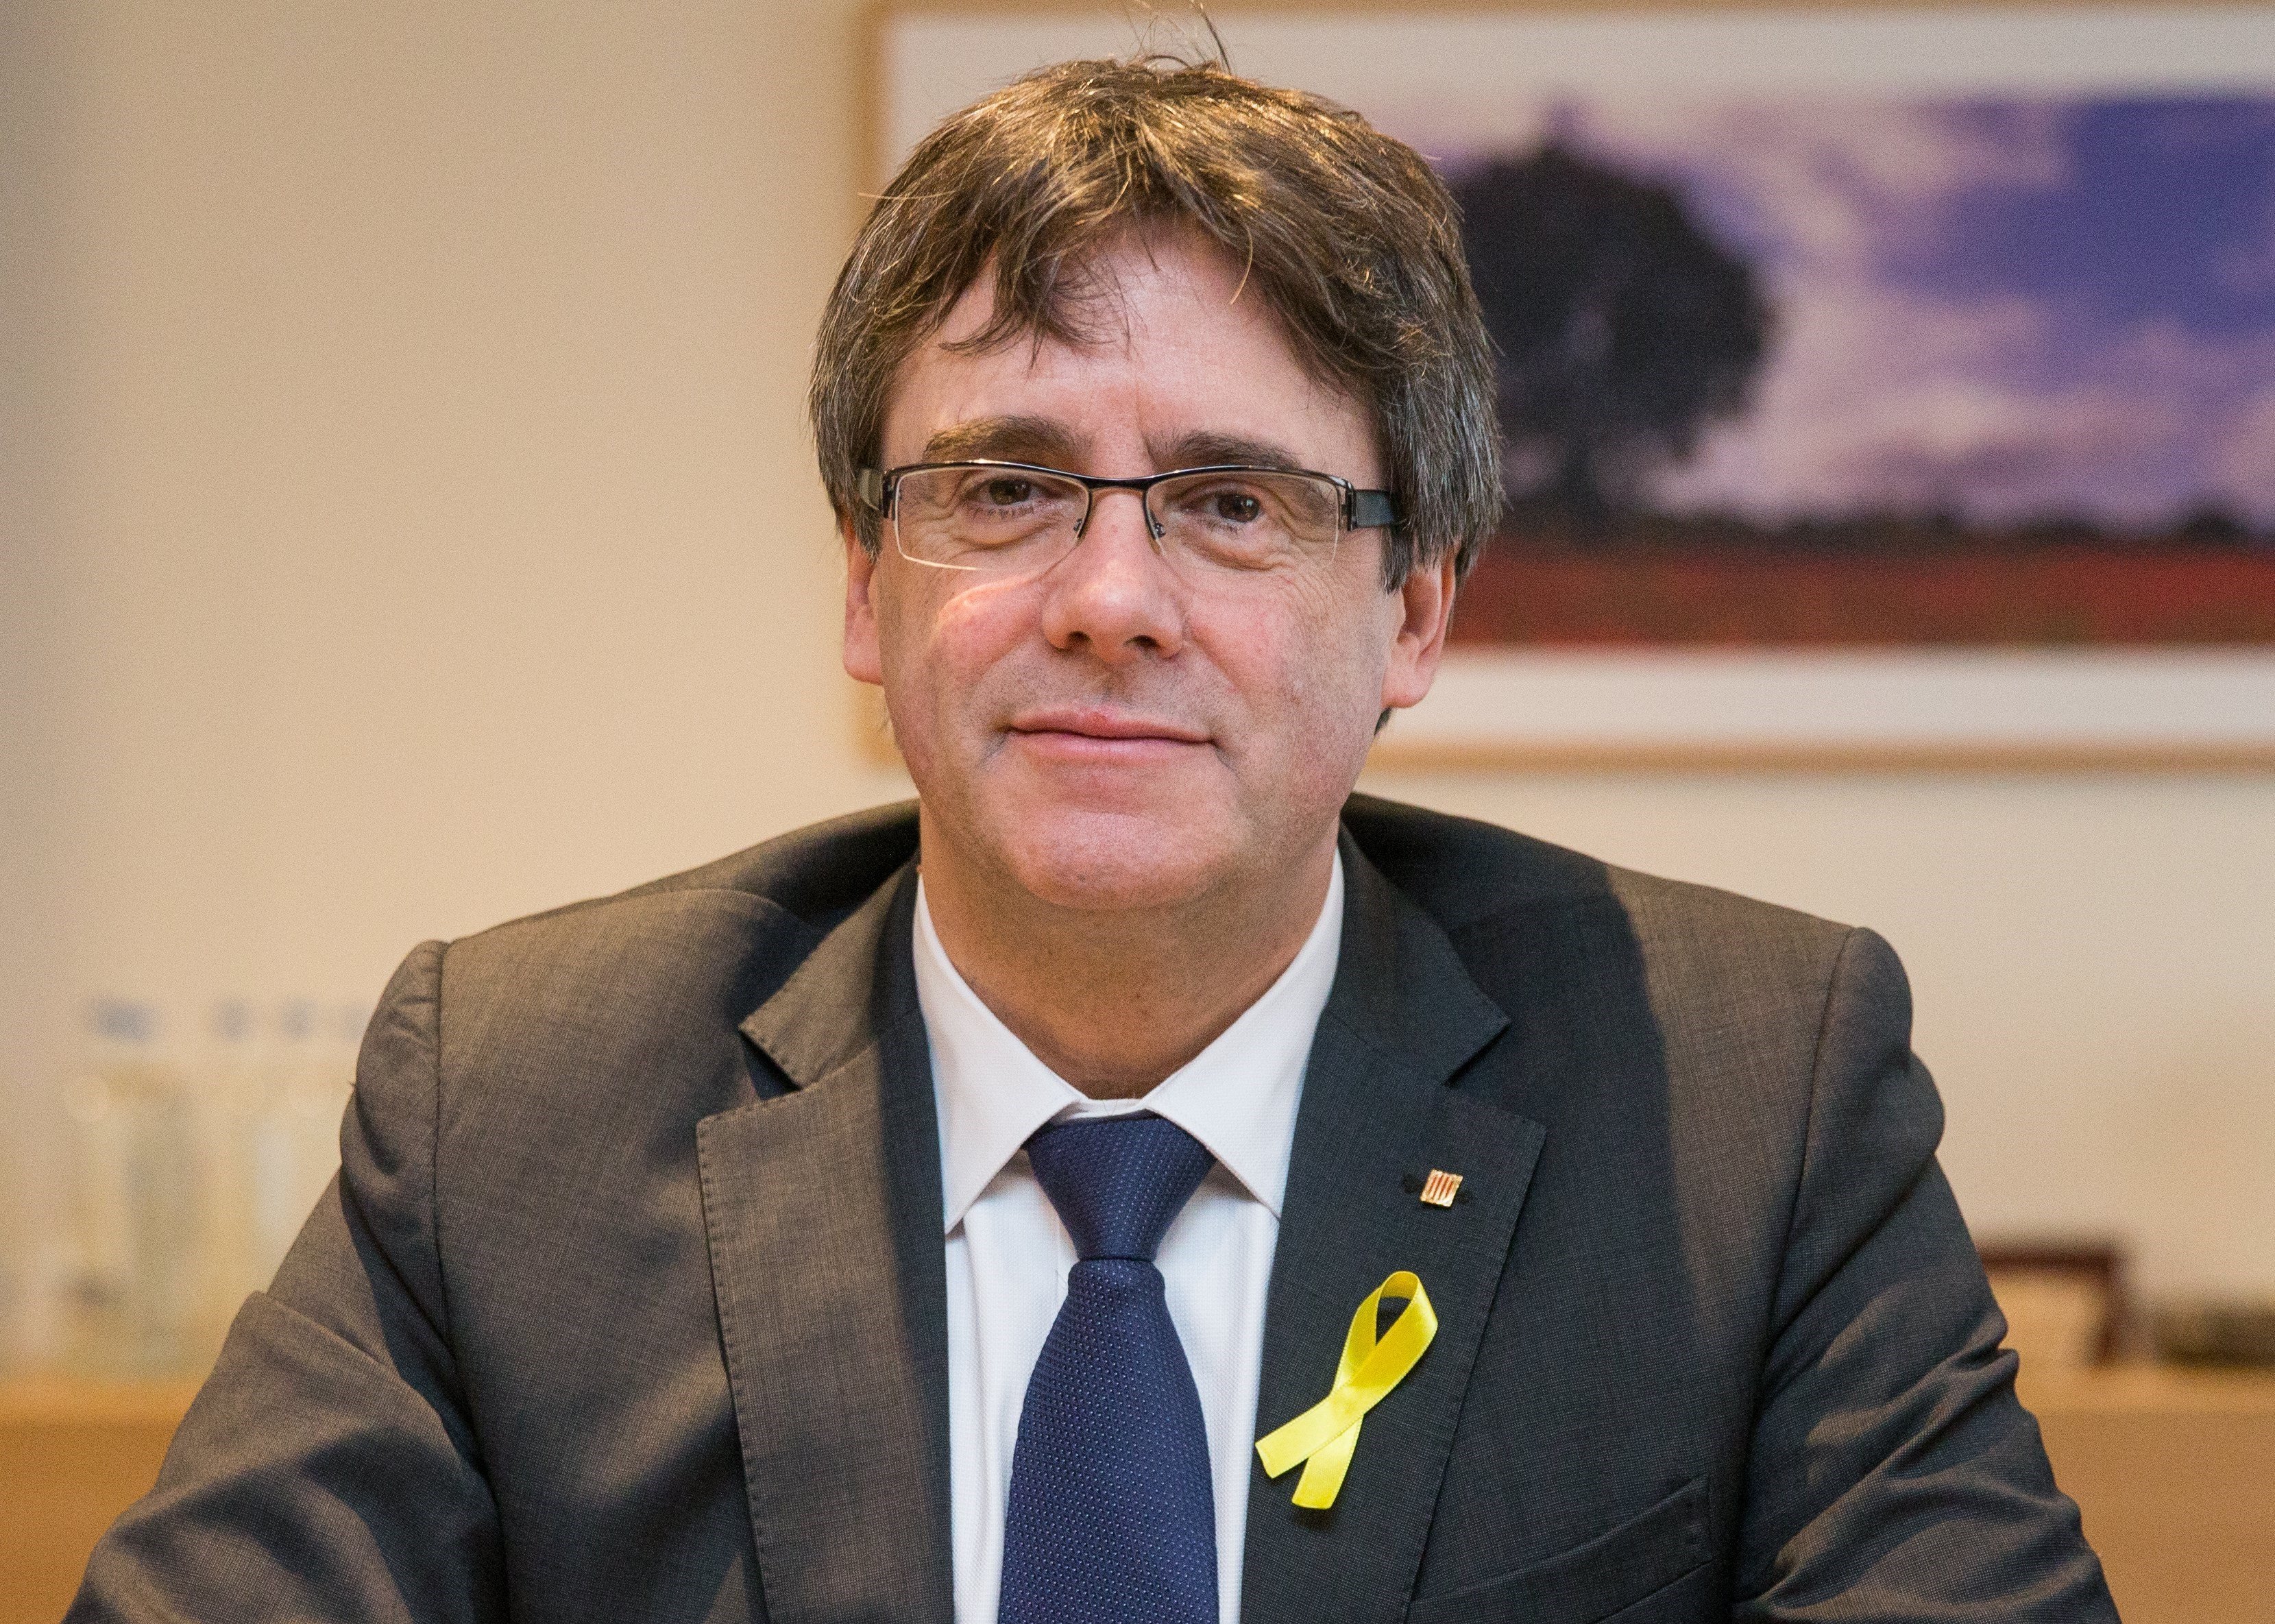 Unionist offensive to stop Puigdemont's investiture as Catalan president